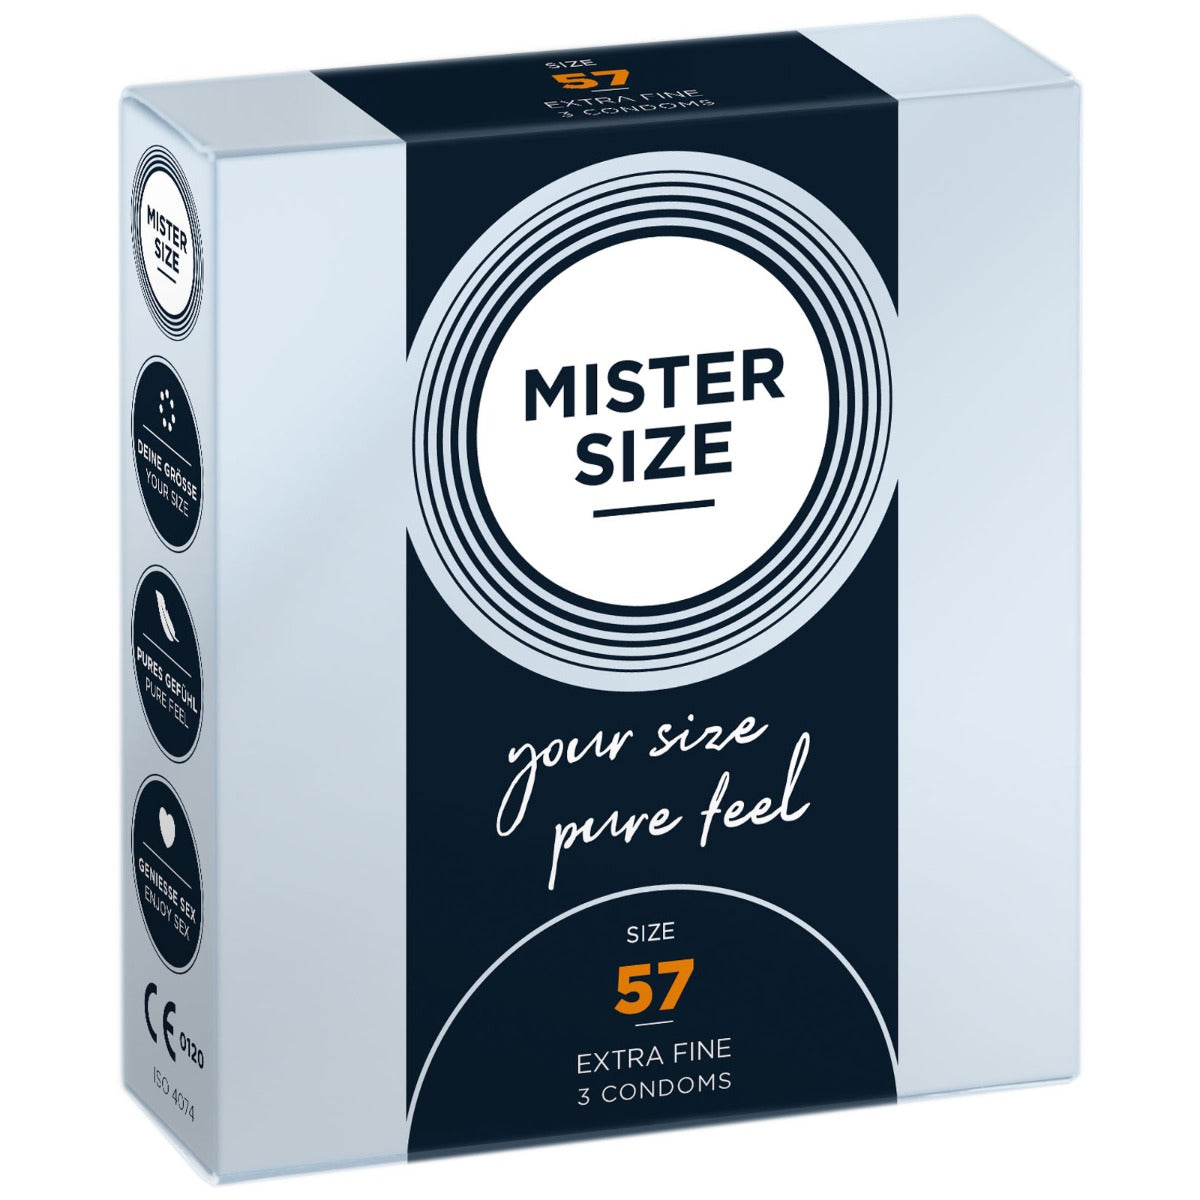 Mister Size Pure Feel Condoms 57mm (8085940895983)